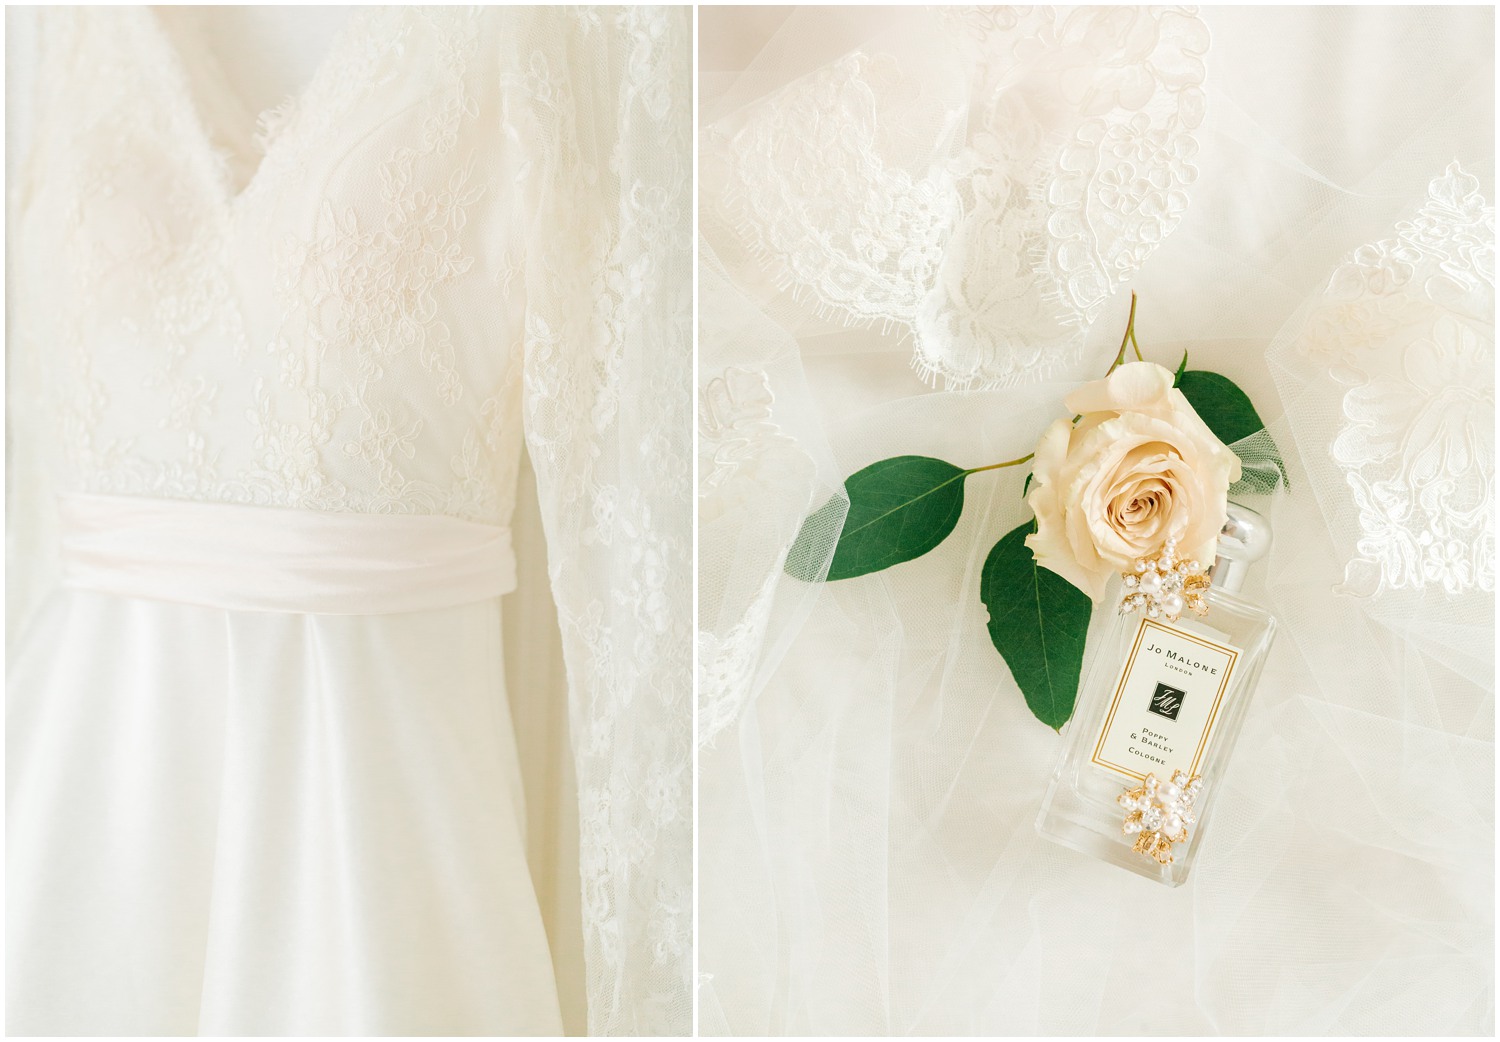  bride's lace wedding gown photographed by Chelsea Renay Photography